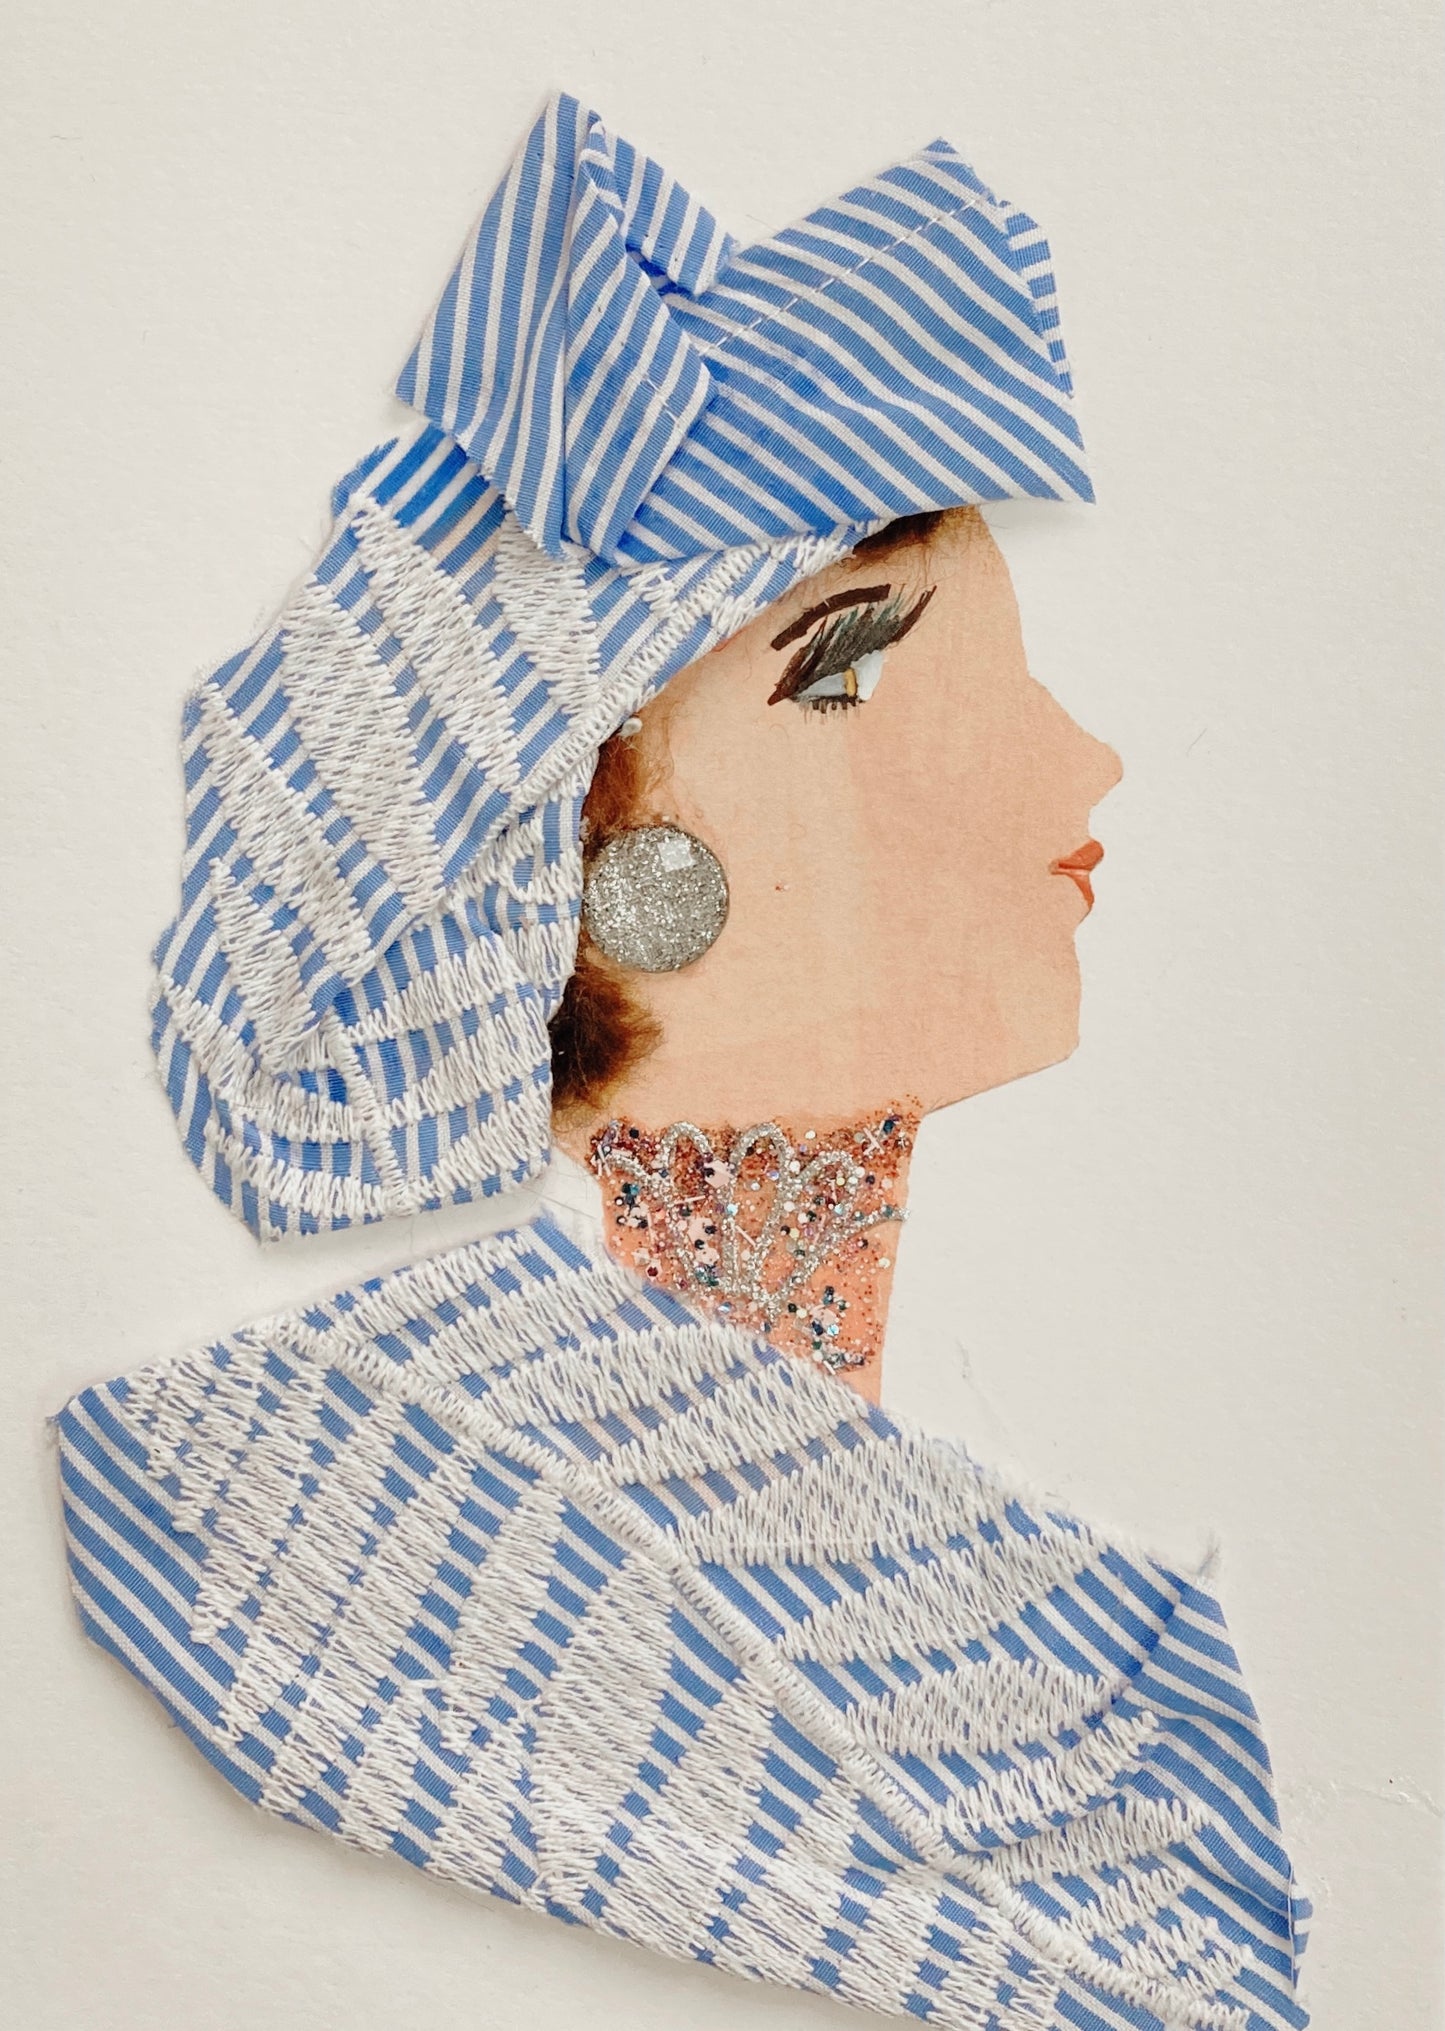 This card has been given the name Robin Redbridge. Robin wears a matching blouse and headscarf, both made of a blue and white pinstripe fabric with a leafy white embroidery overlaying. She wears a large, glittery gem for her earring and a glittery necklace. Visit my website for more 